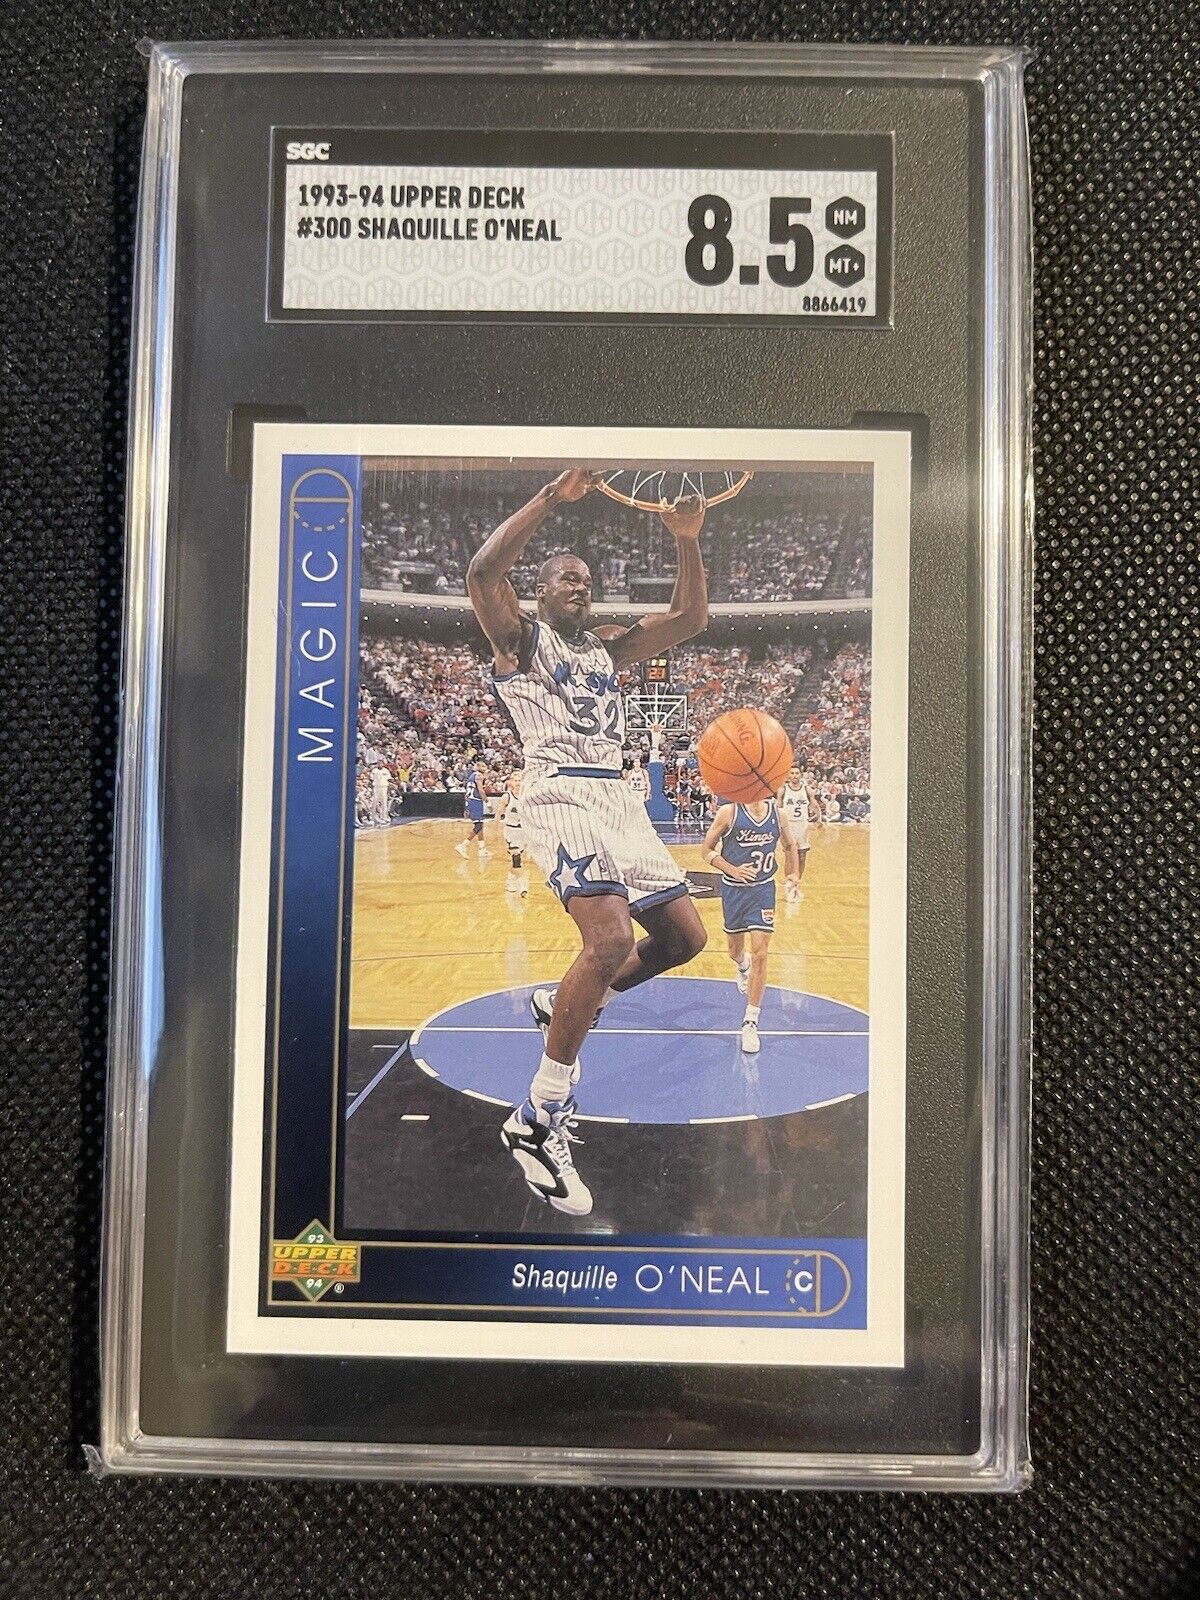 SHAQUILLE O'NEAL 1993-94 Upper Deck Rookie Card  #300 SGC 8.5